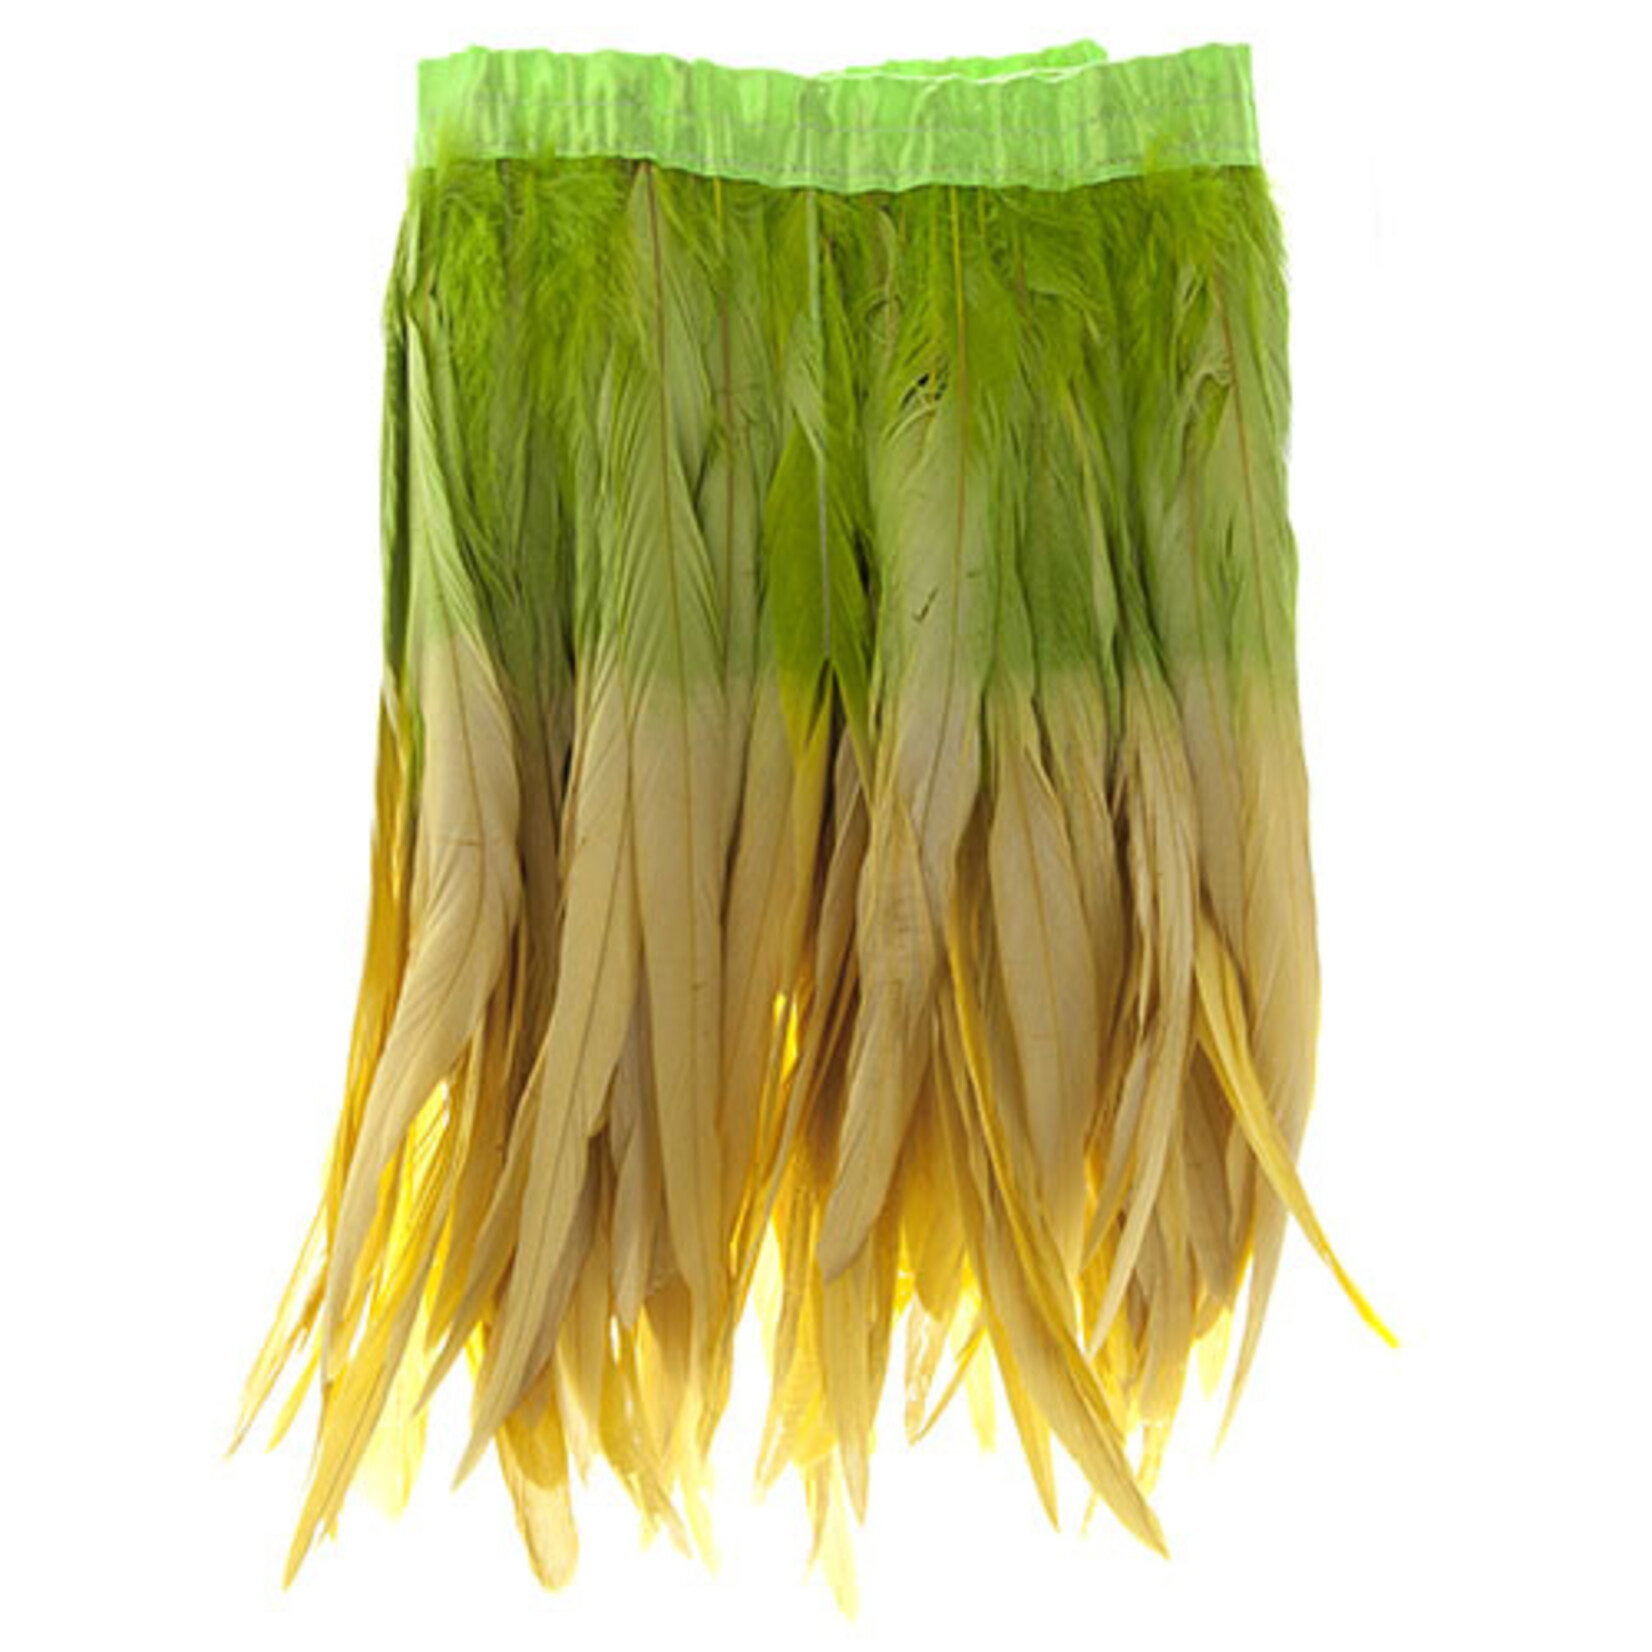 Coque Feathers Value 2 Tone 14 - 16 Inches Lemon/Lime